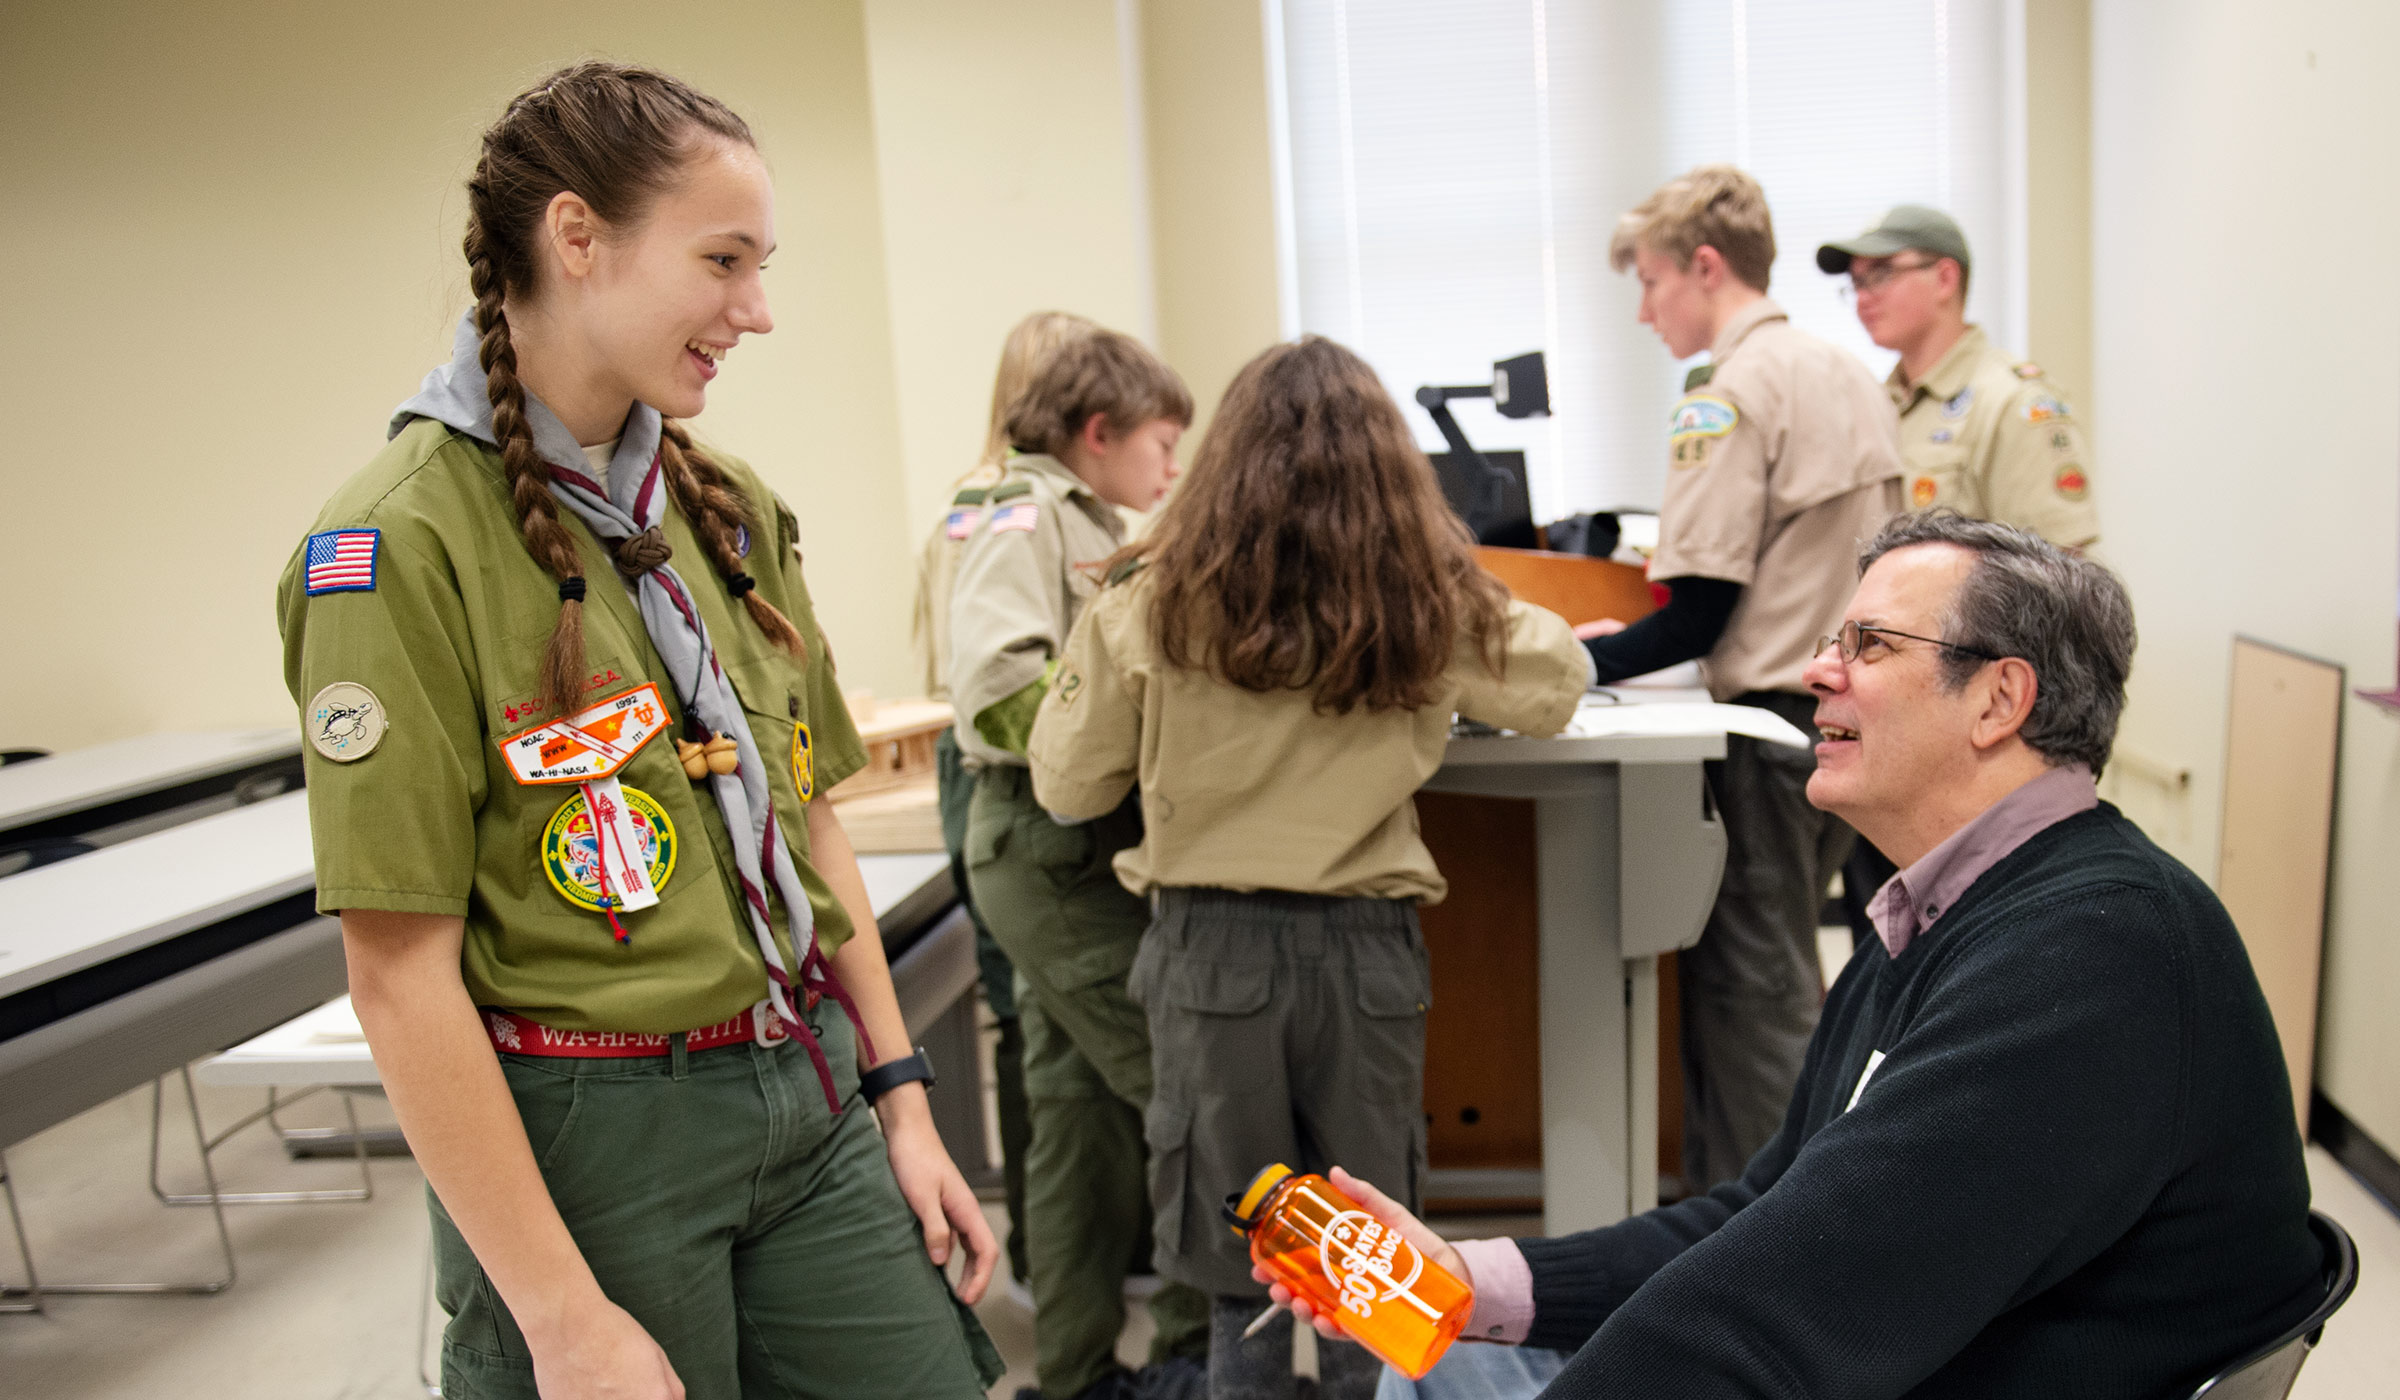 BSA Scout Taylor Bell presents a water bottle to MSU Architecture Professor Richard Chenoweth, commemorating her 28th state to complete a merit badge in.